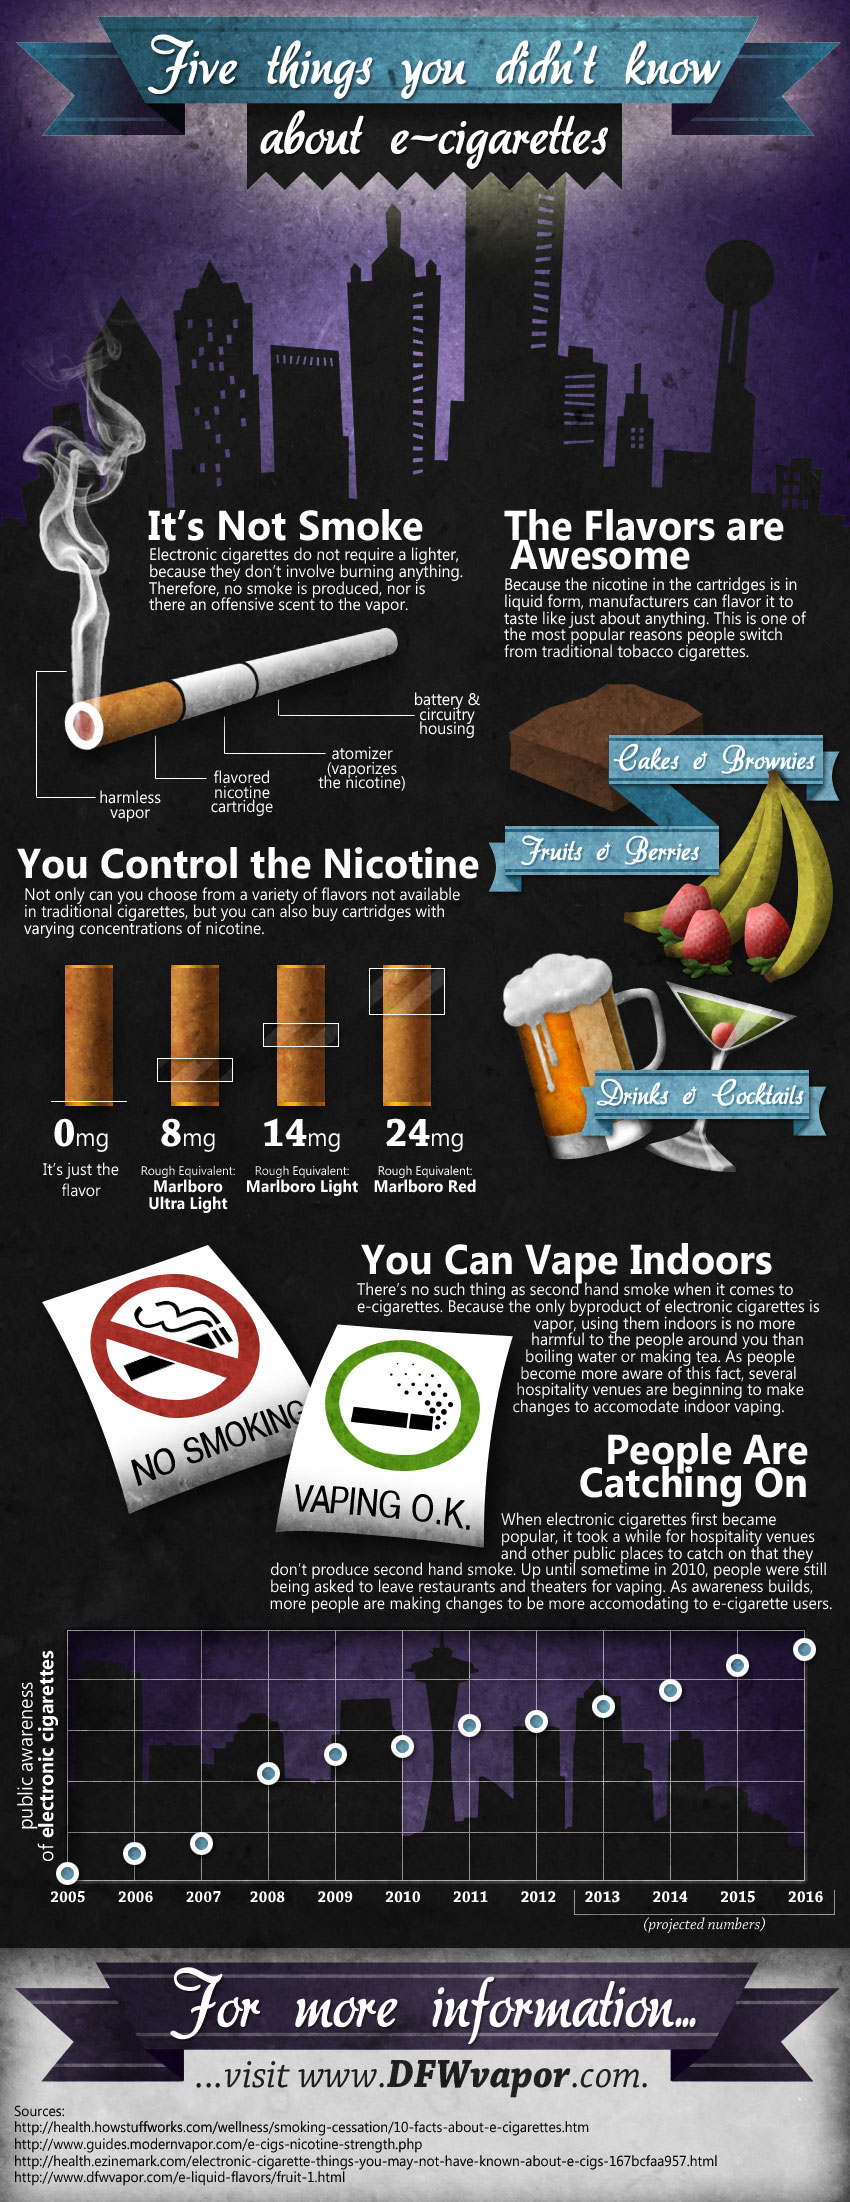 5 Things You Didn’t Know About E-Cigarettes [Infographic]